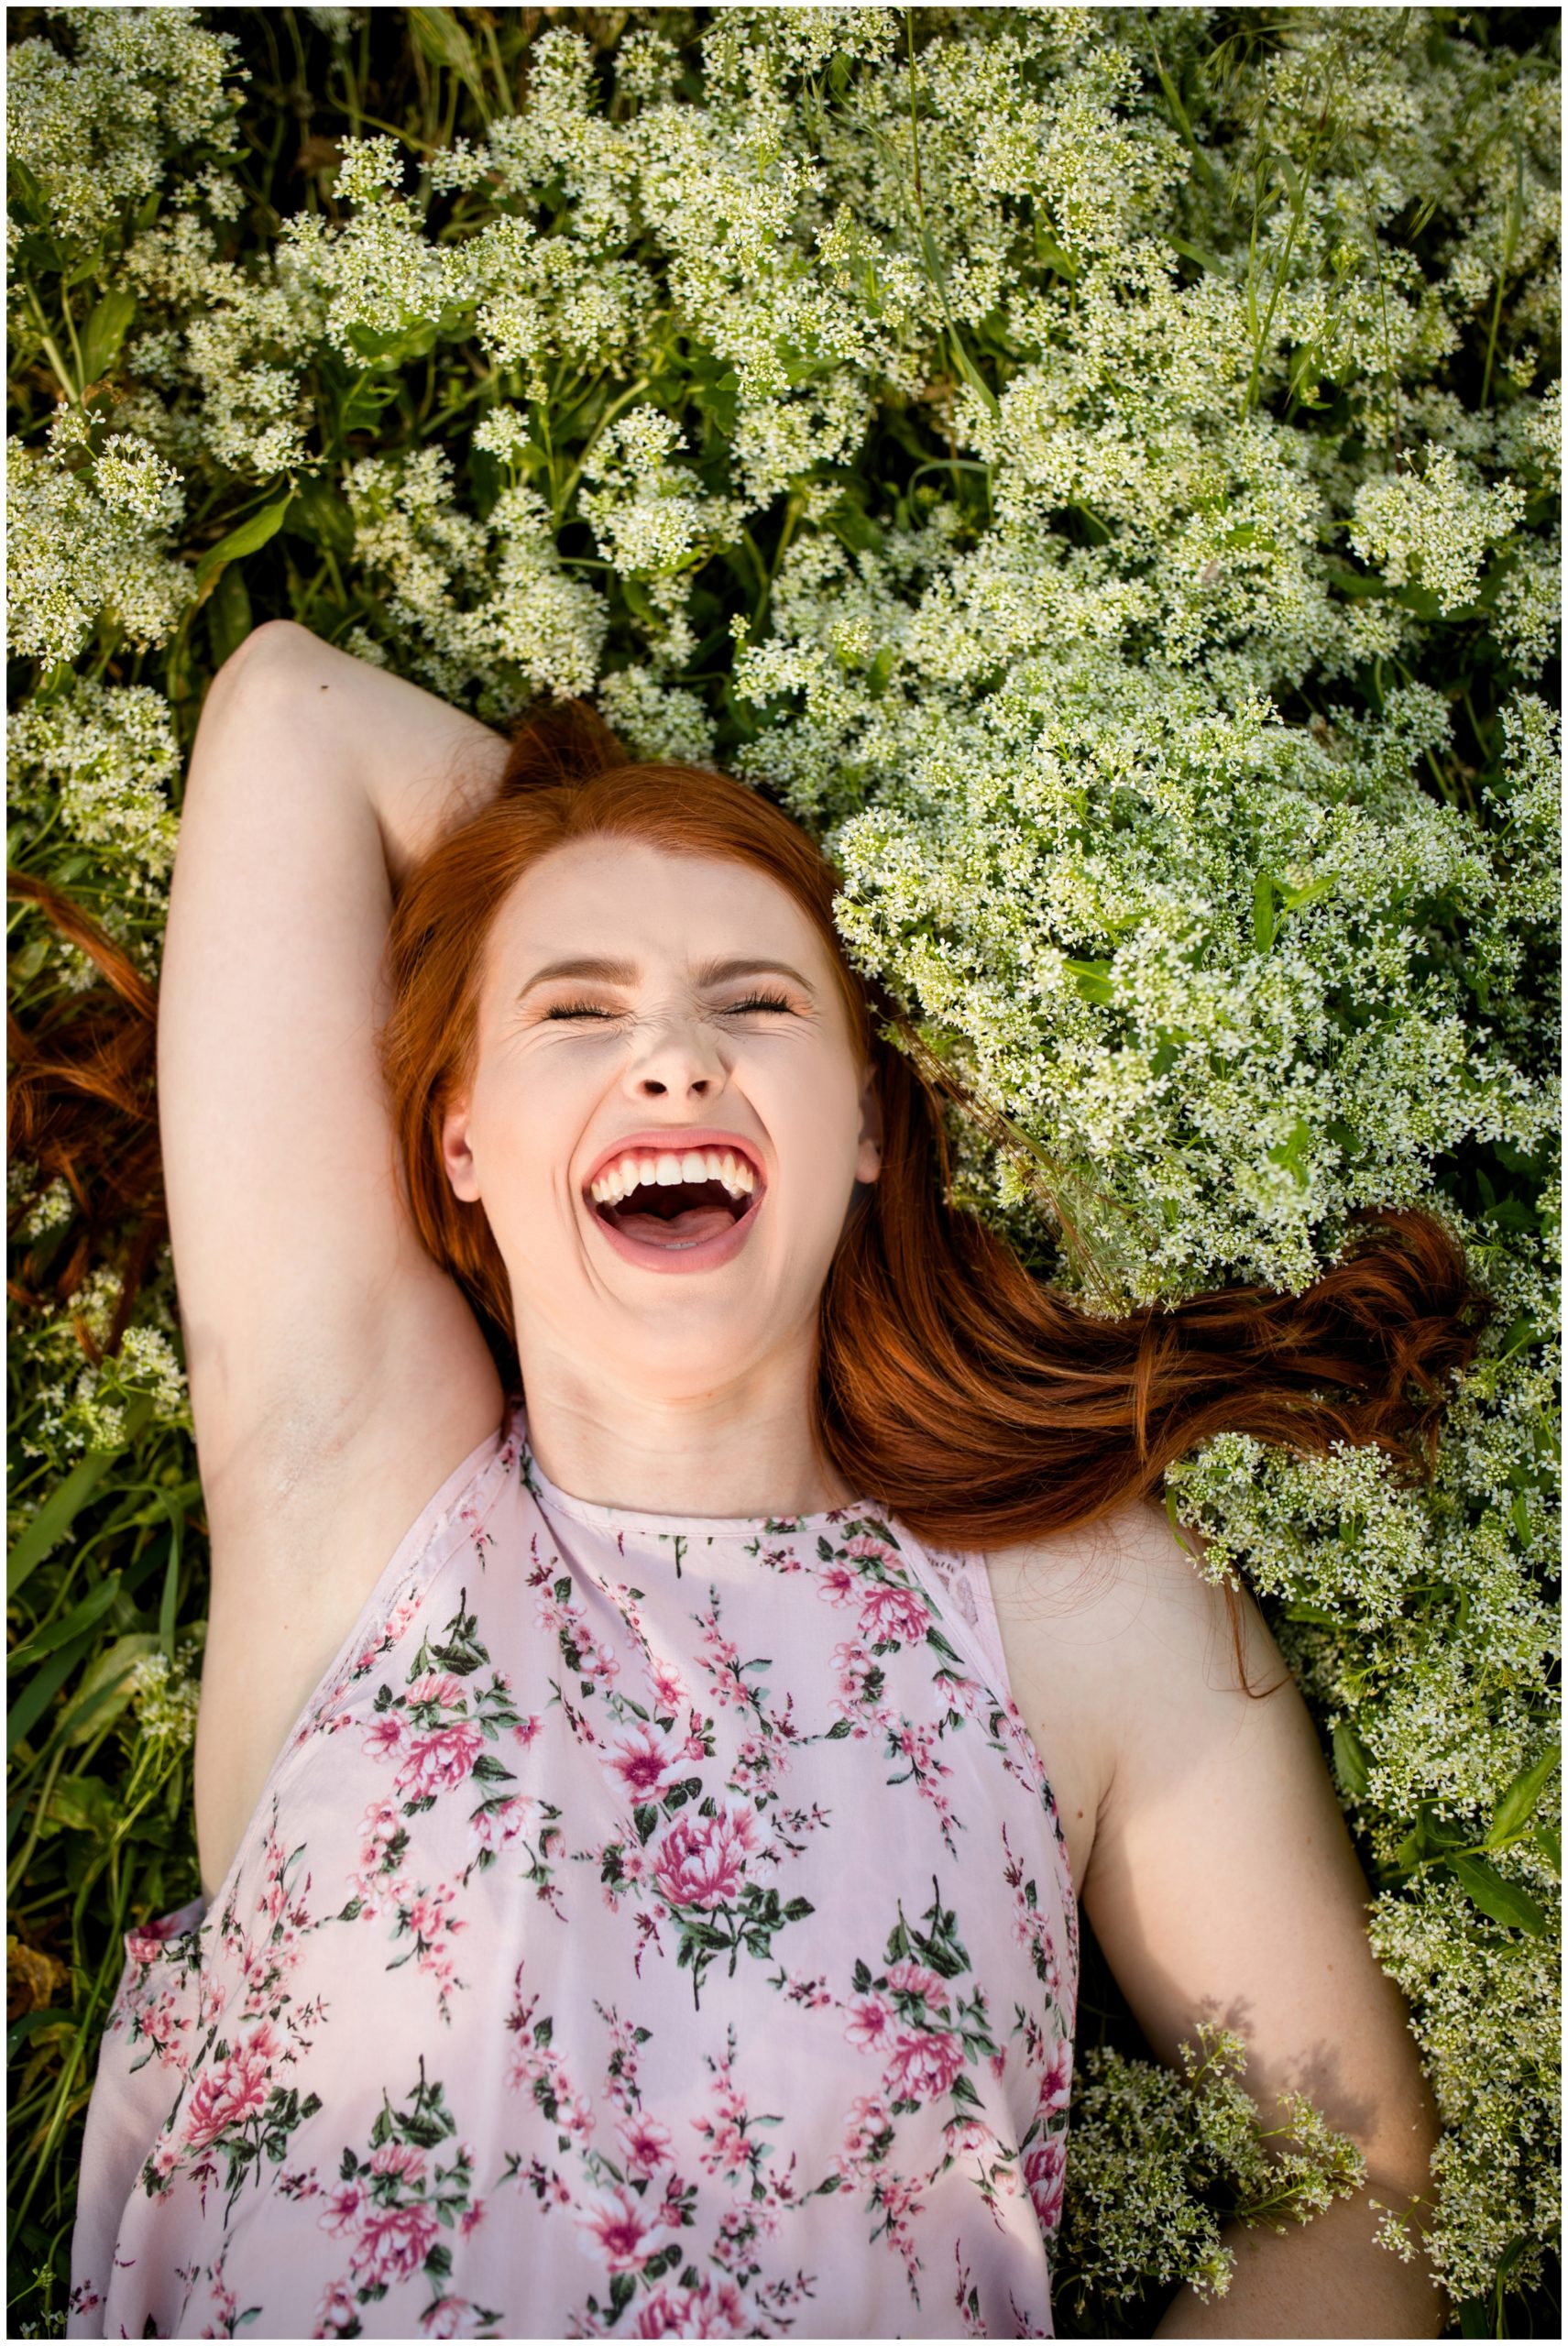 Erie senior photos in a field of flowers by Colorado portrait photographer Plum Pretty Photography